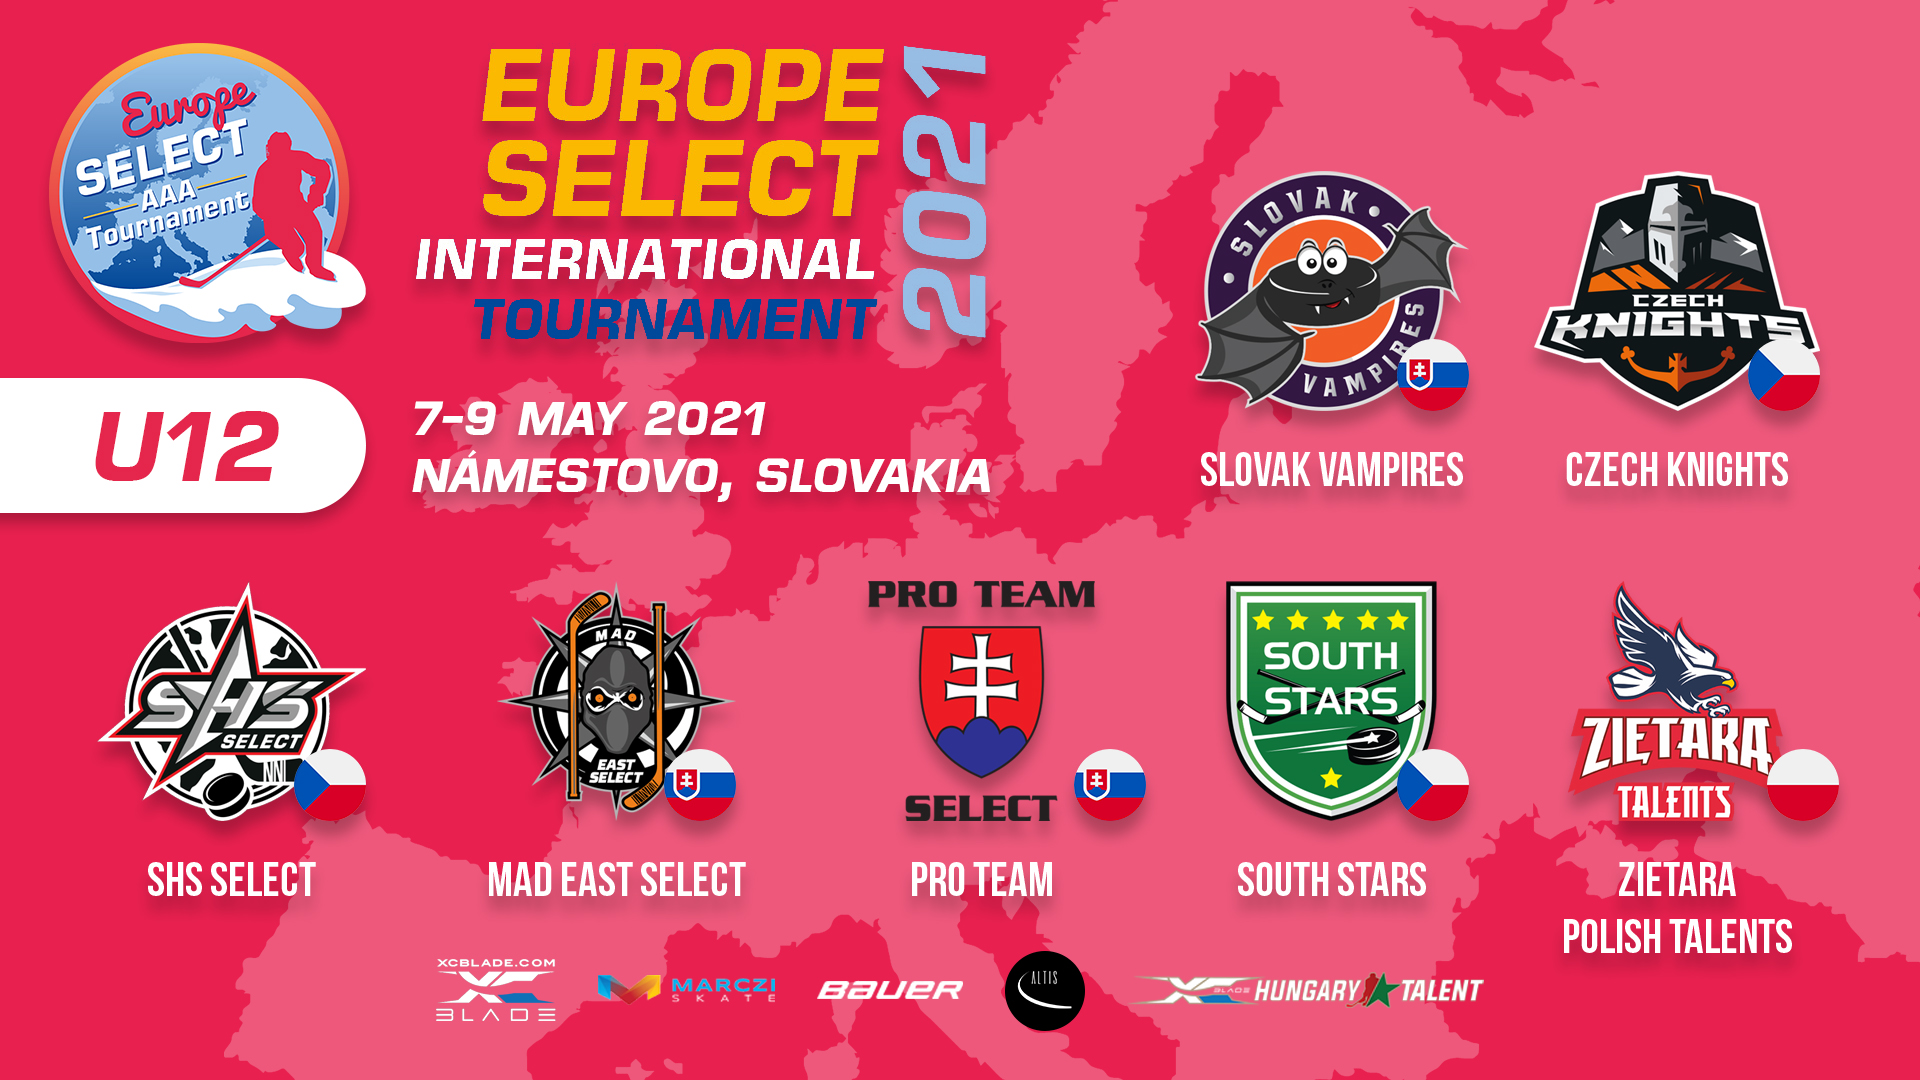 The first Europe Select Tournament is coming